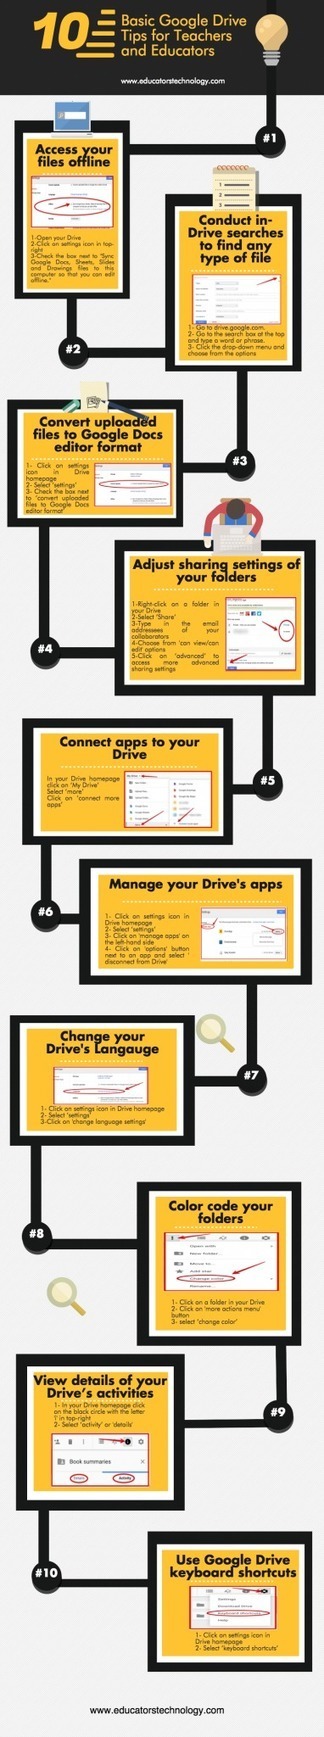 10 Google Drive Tips for Teachers Infographic | digital marketing strategy | Scoop.it